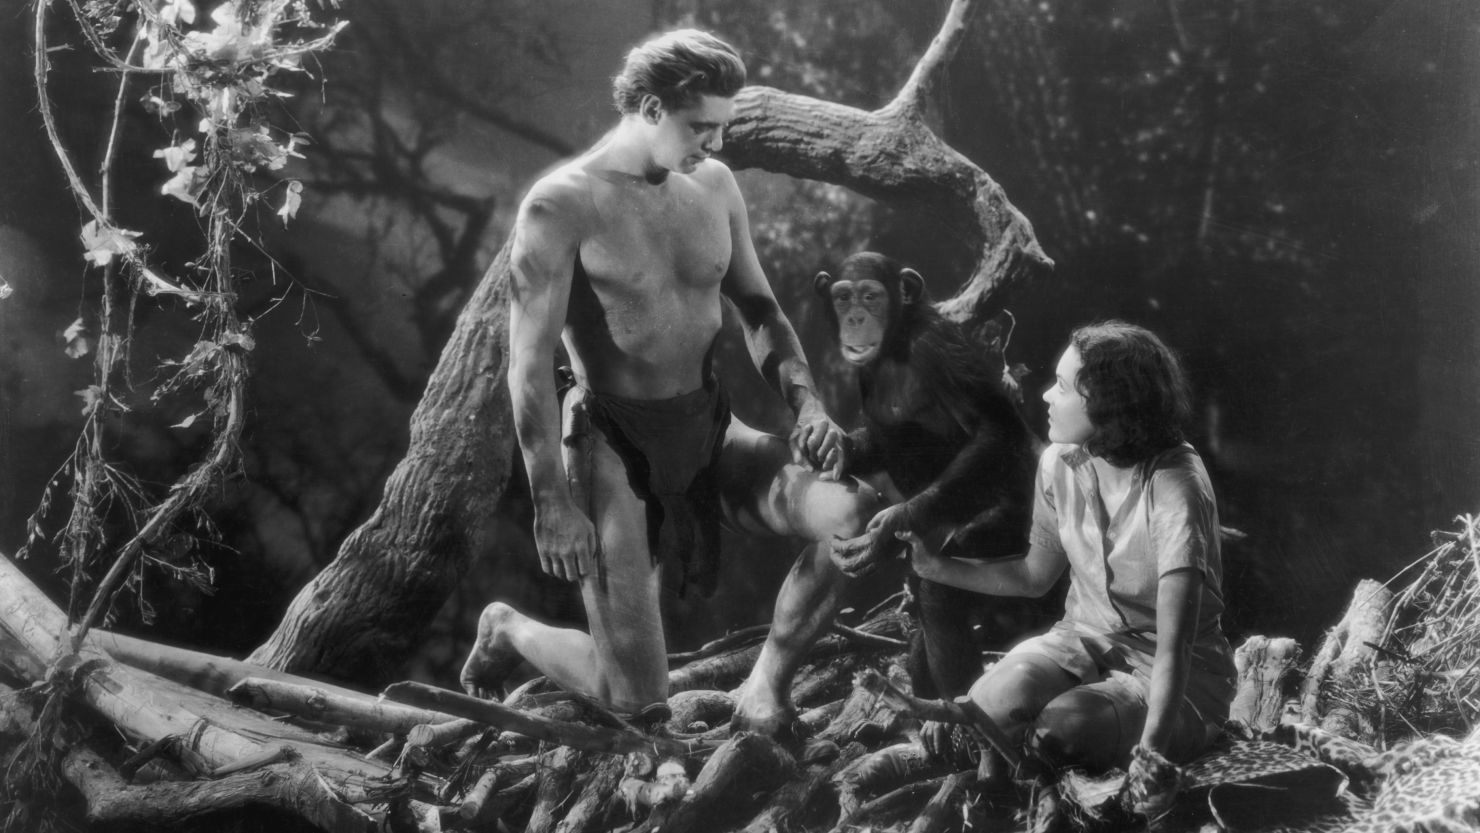 Several chimpanzees appeared in various Tarzan movies, many of which were popular in the 1930s and 1940s. 